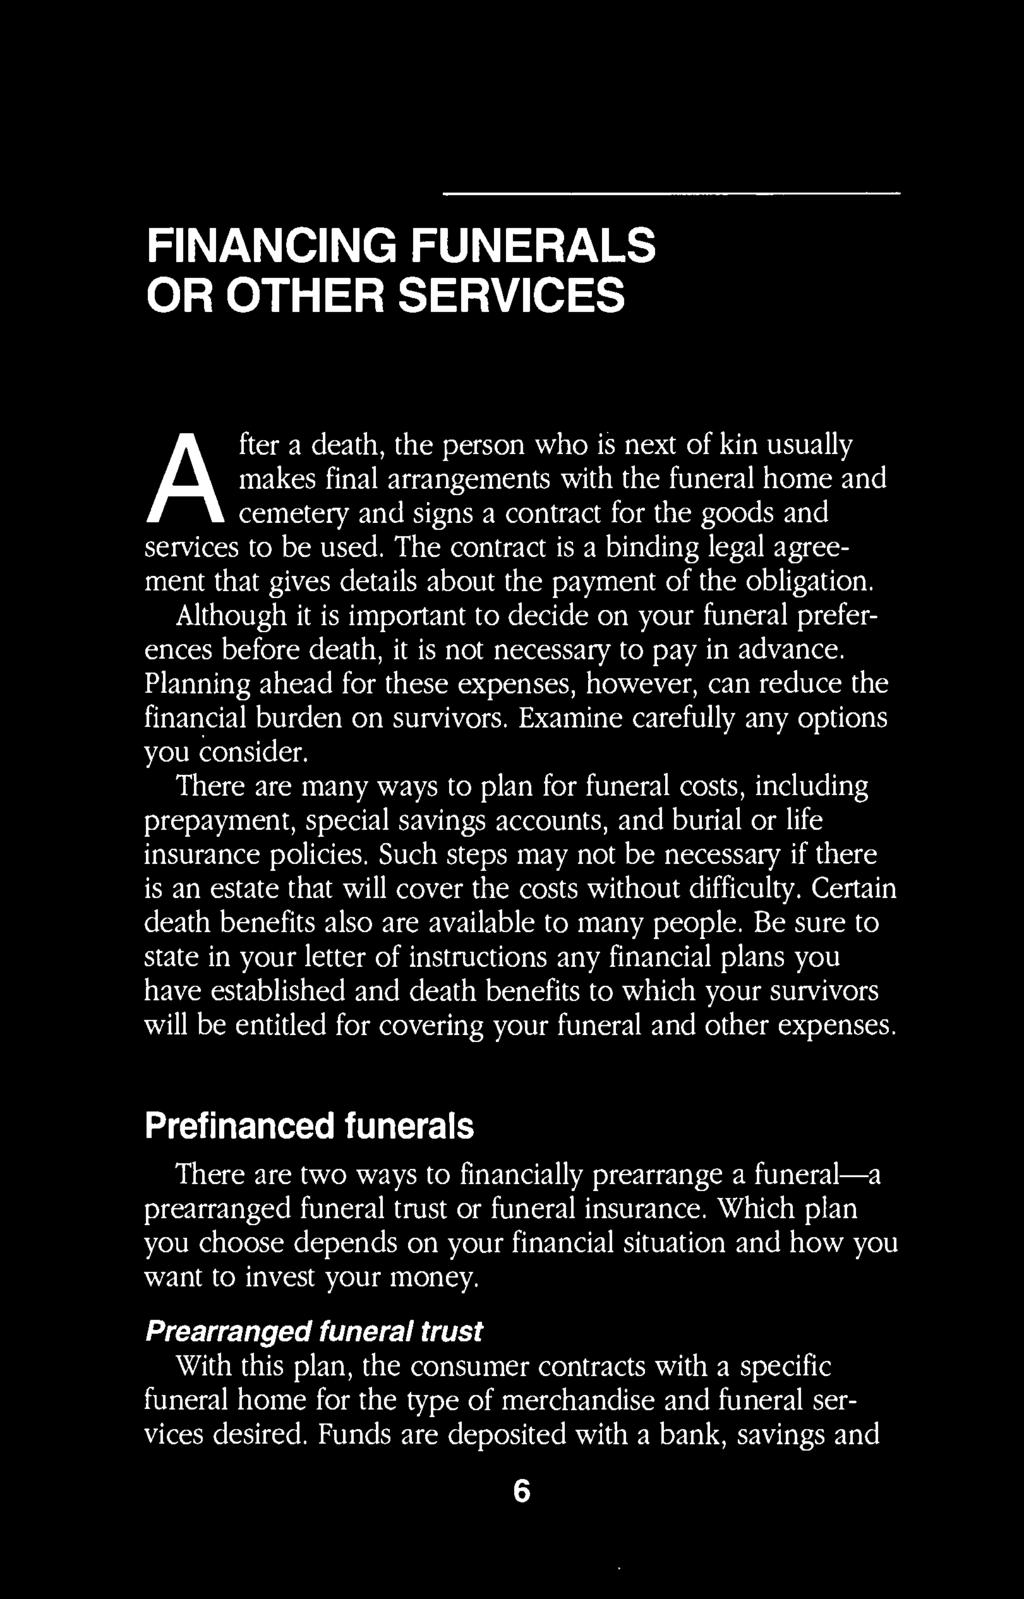 There are many ways to plan for funeral costs, including prepayment, special savings accounts, and burial or life insurance policies.